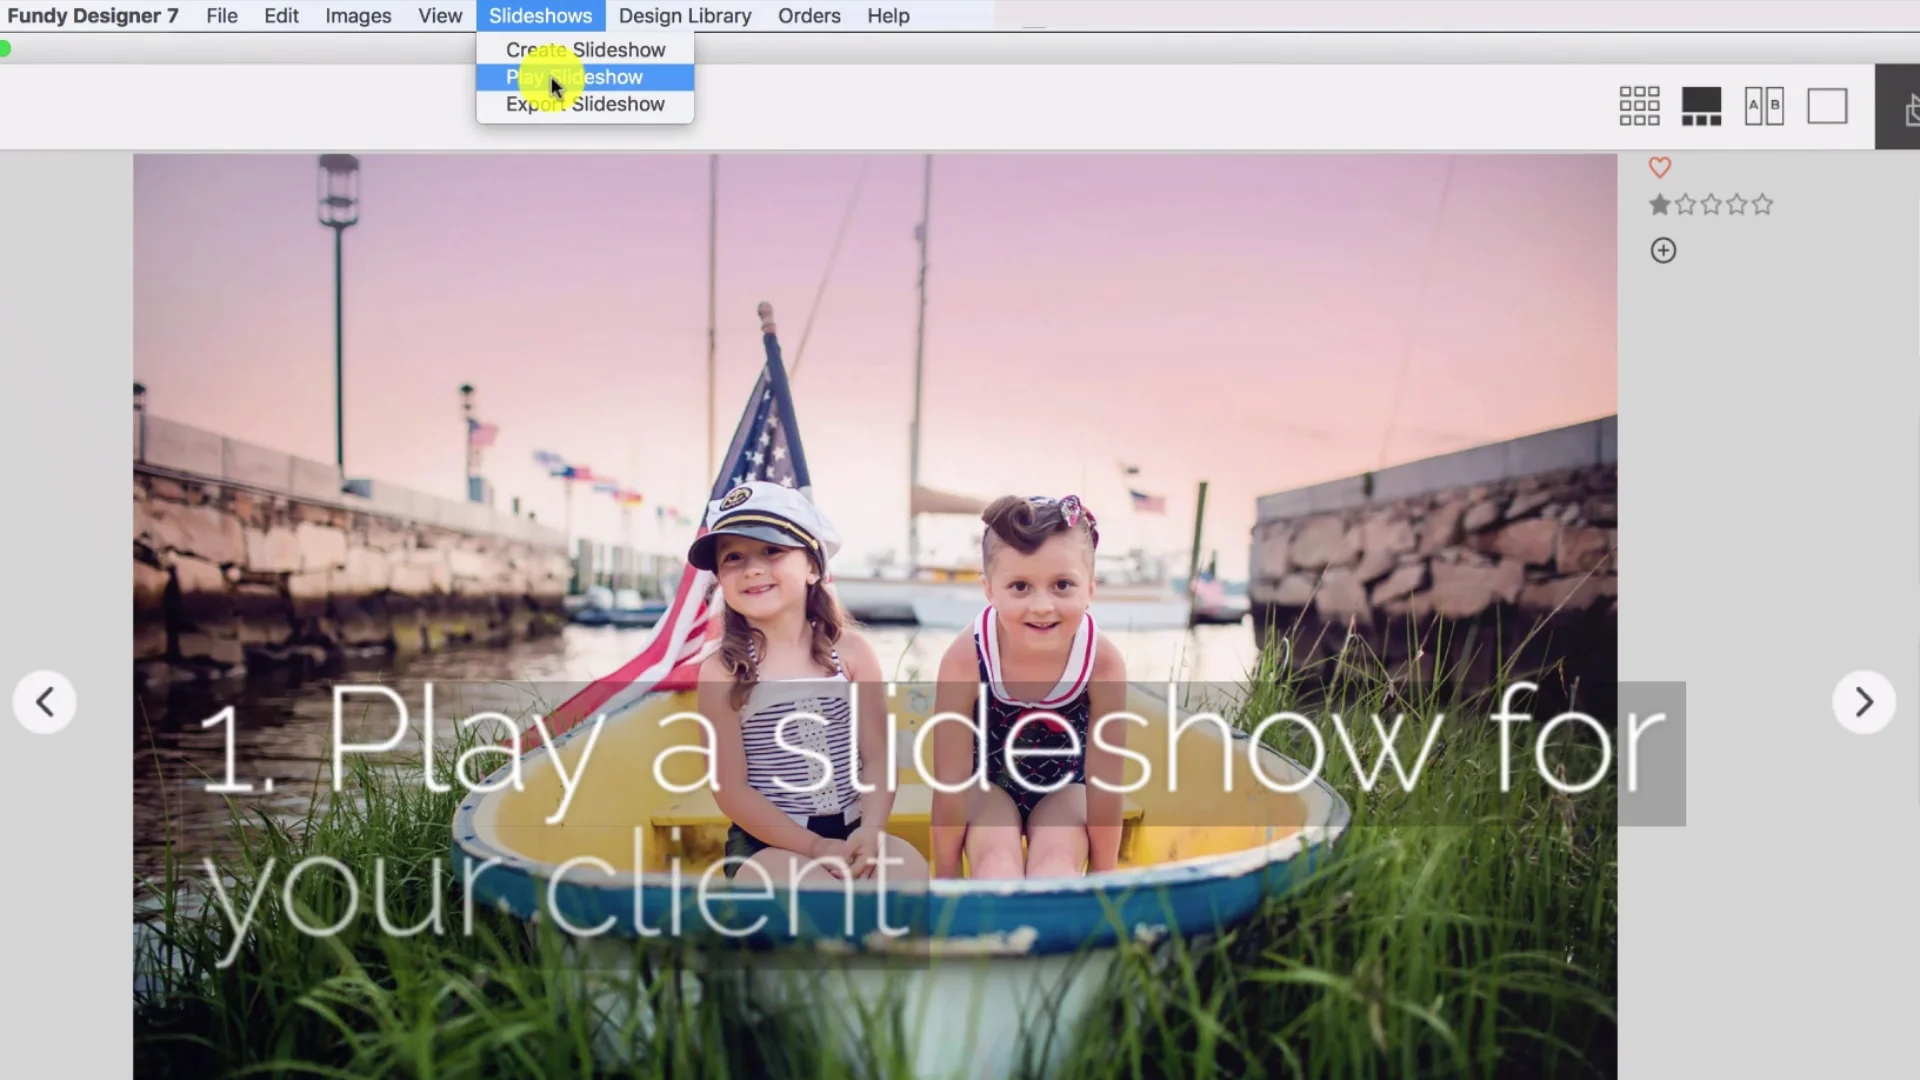 How to Create Slideshows in Fundy Designer on Vimeo